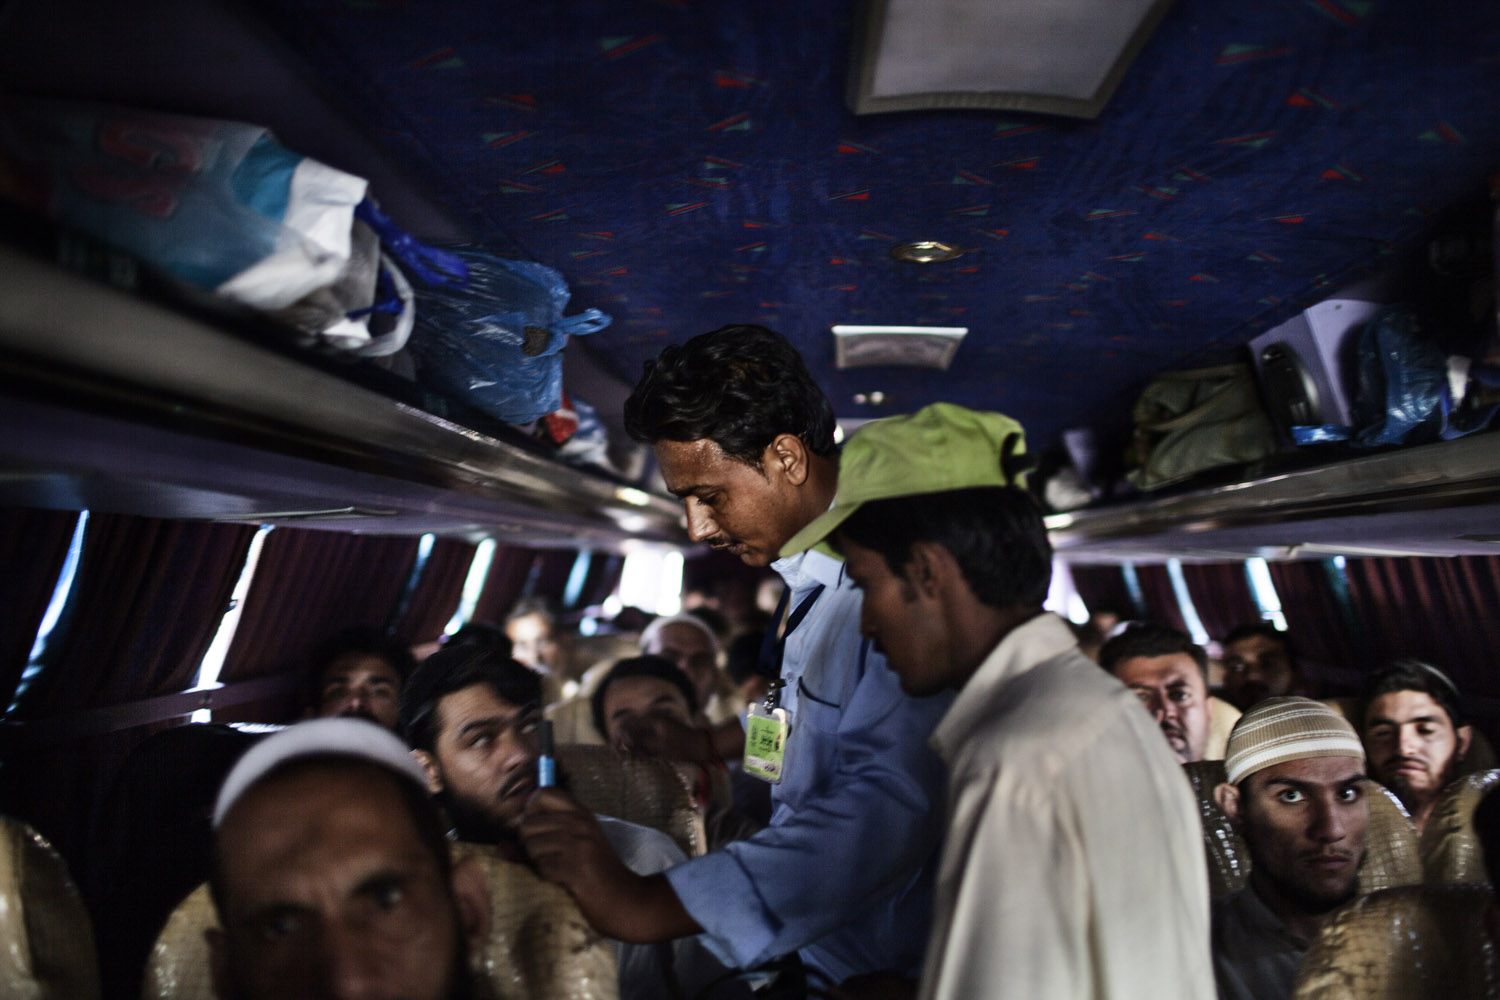 Image: The polio vaccination team at Karachi Toll Plaza has vaccinated more than 500 children traveling on buses